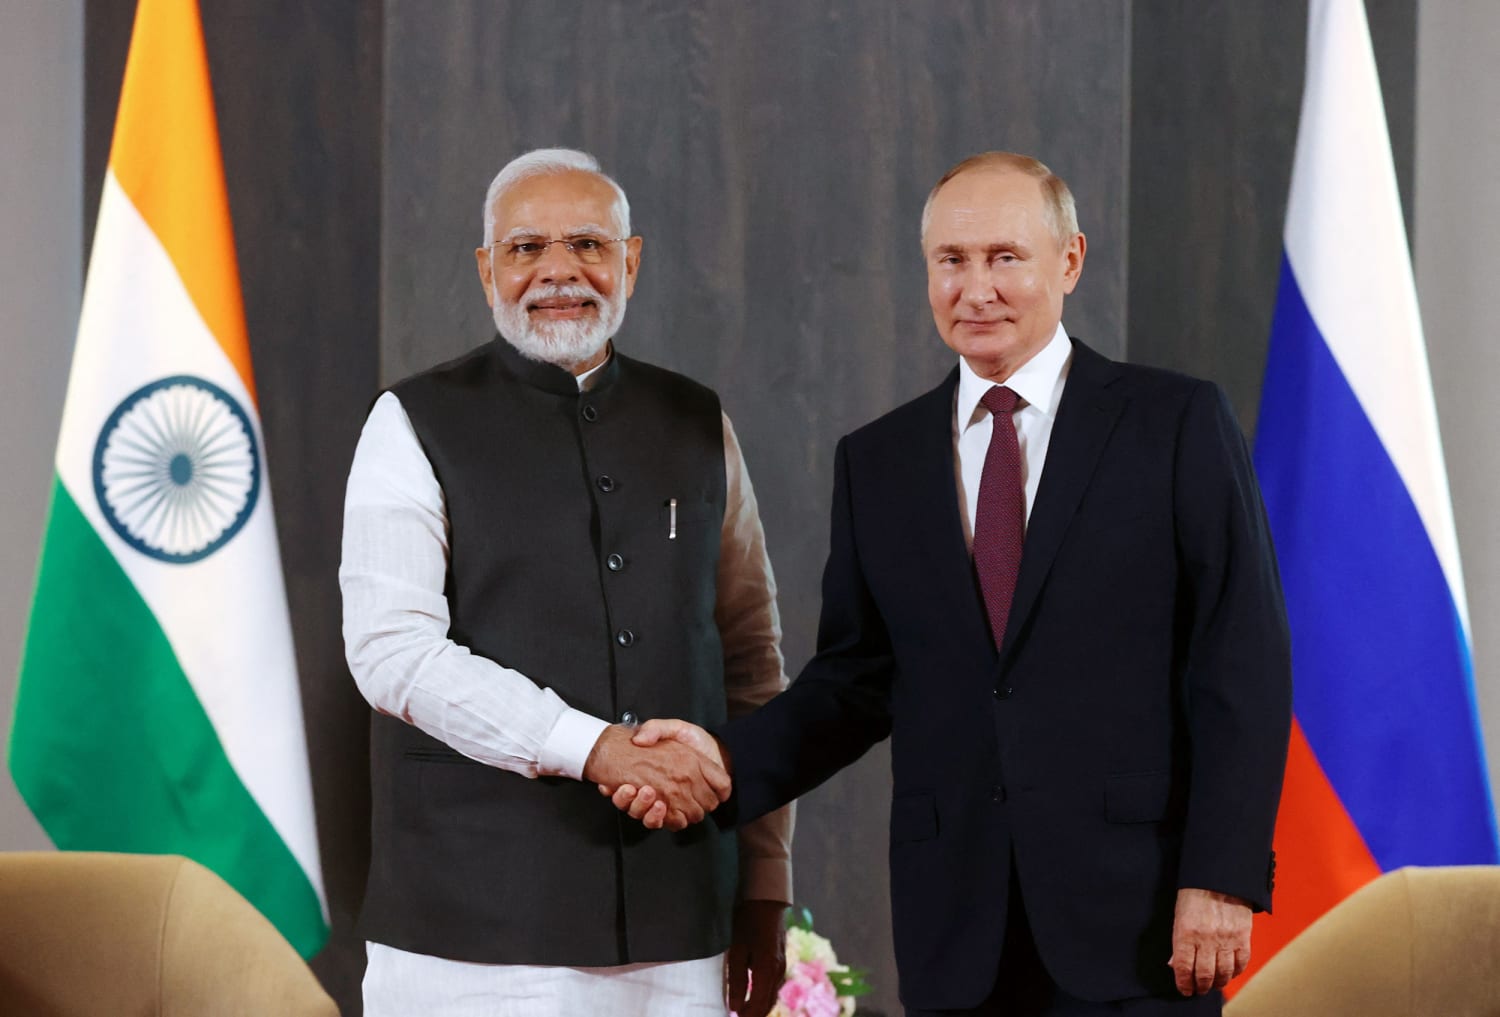 Will Vladimir Putin Attend the G20 Summit on September 9-10, 2023? Here’s What the Indian Ministry of External Affairs Says